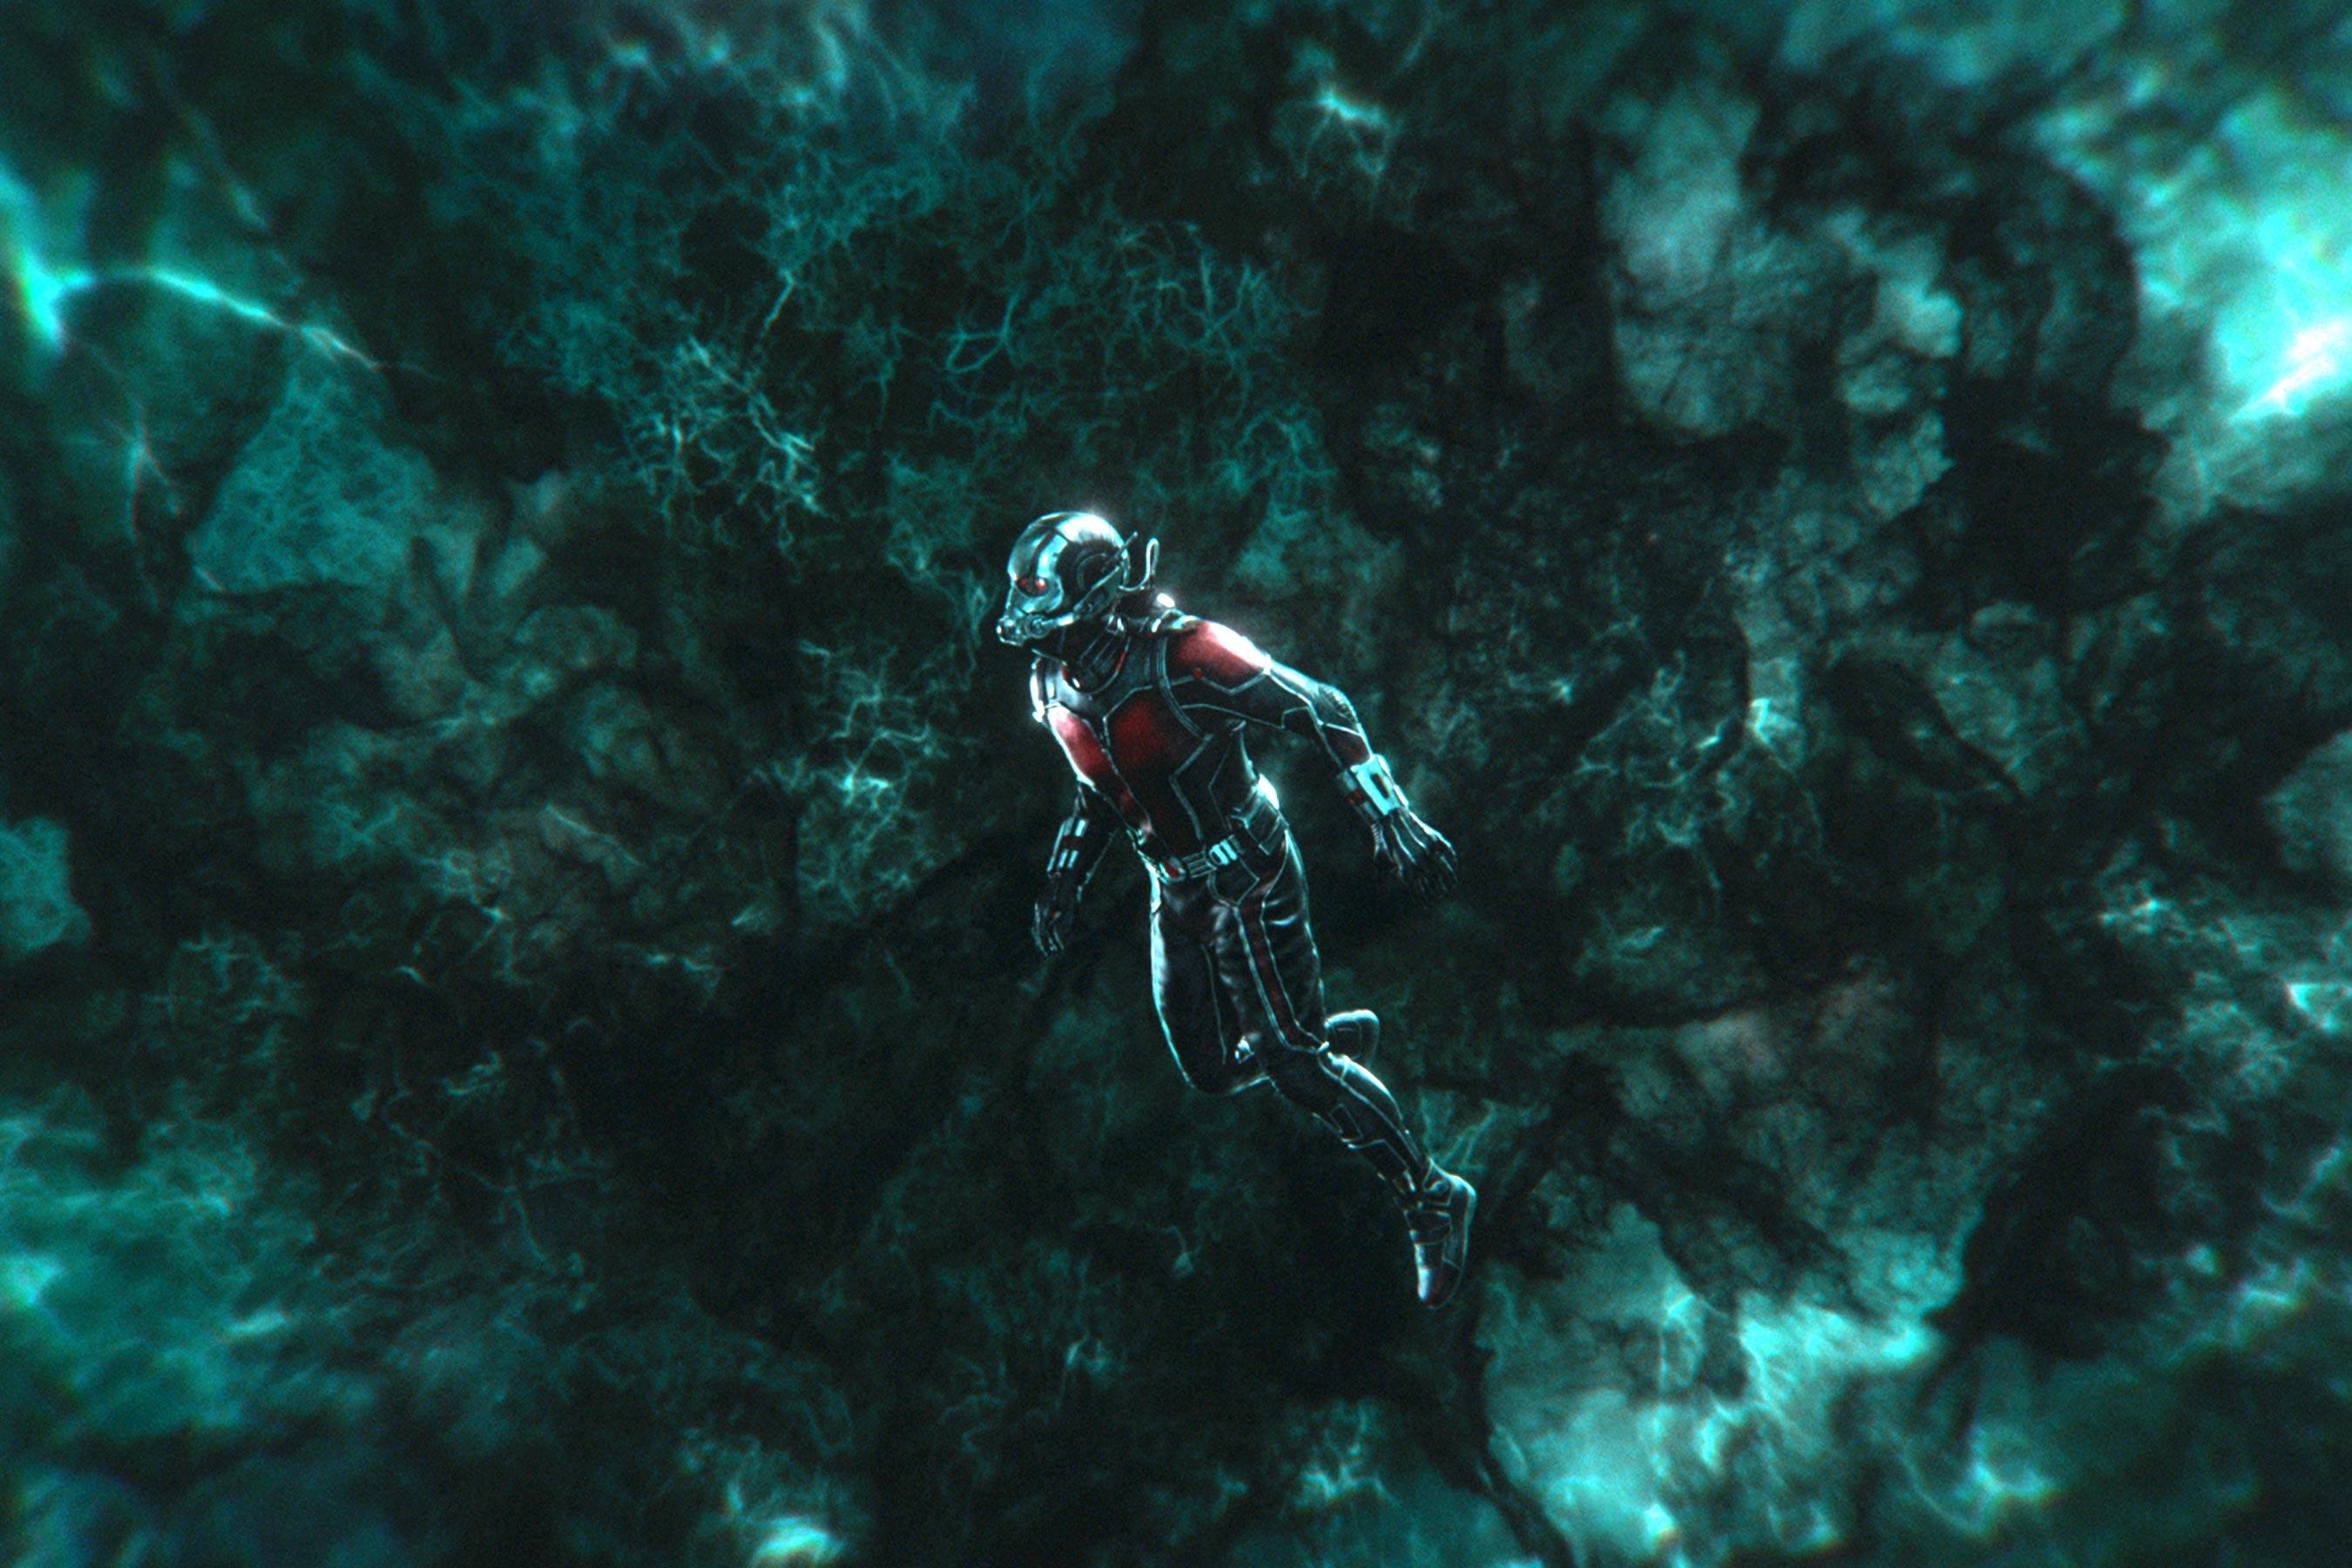 Ant Man And The Wasp Image Tease Quantum Realm, Ghost